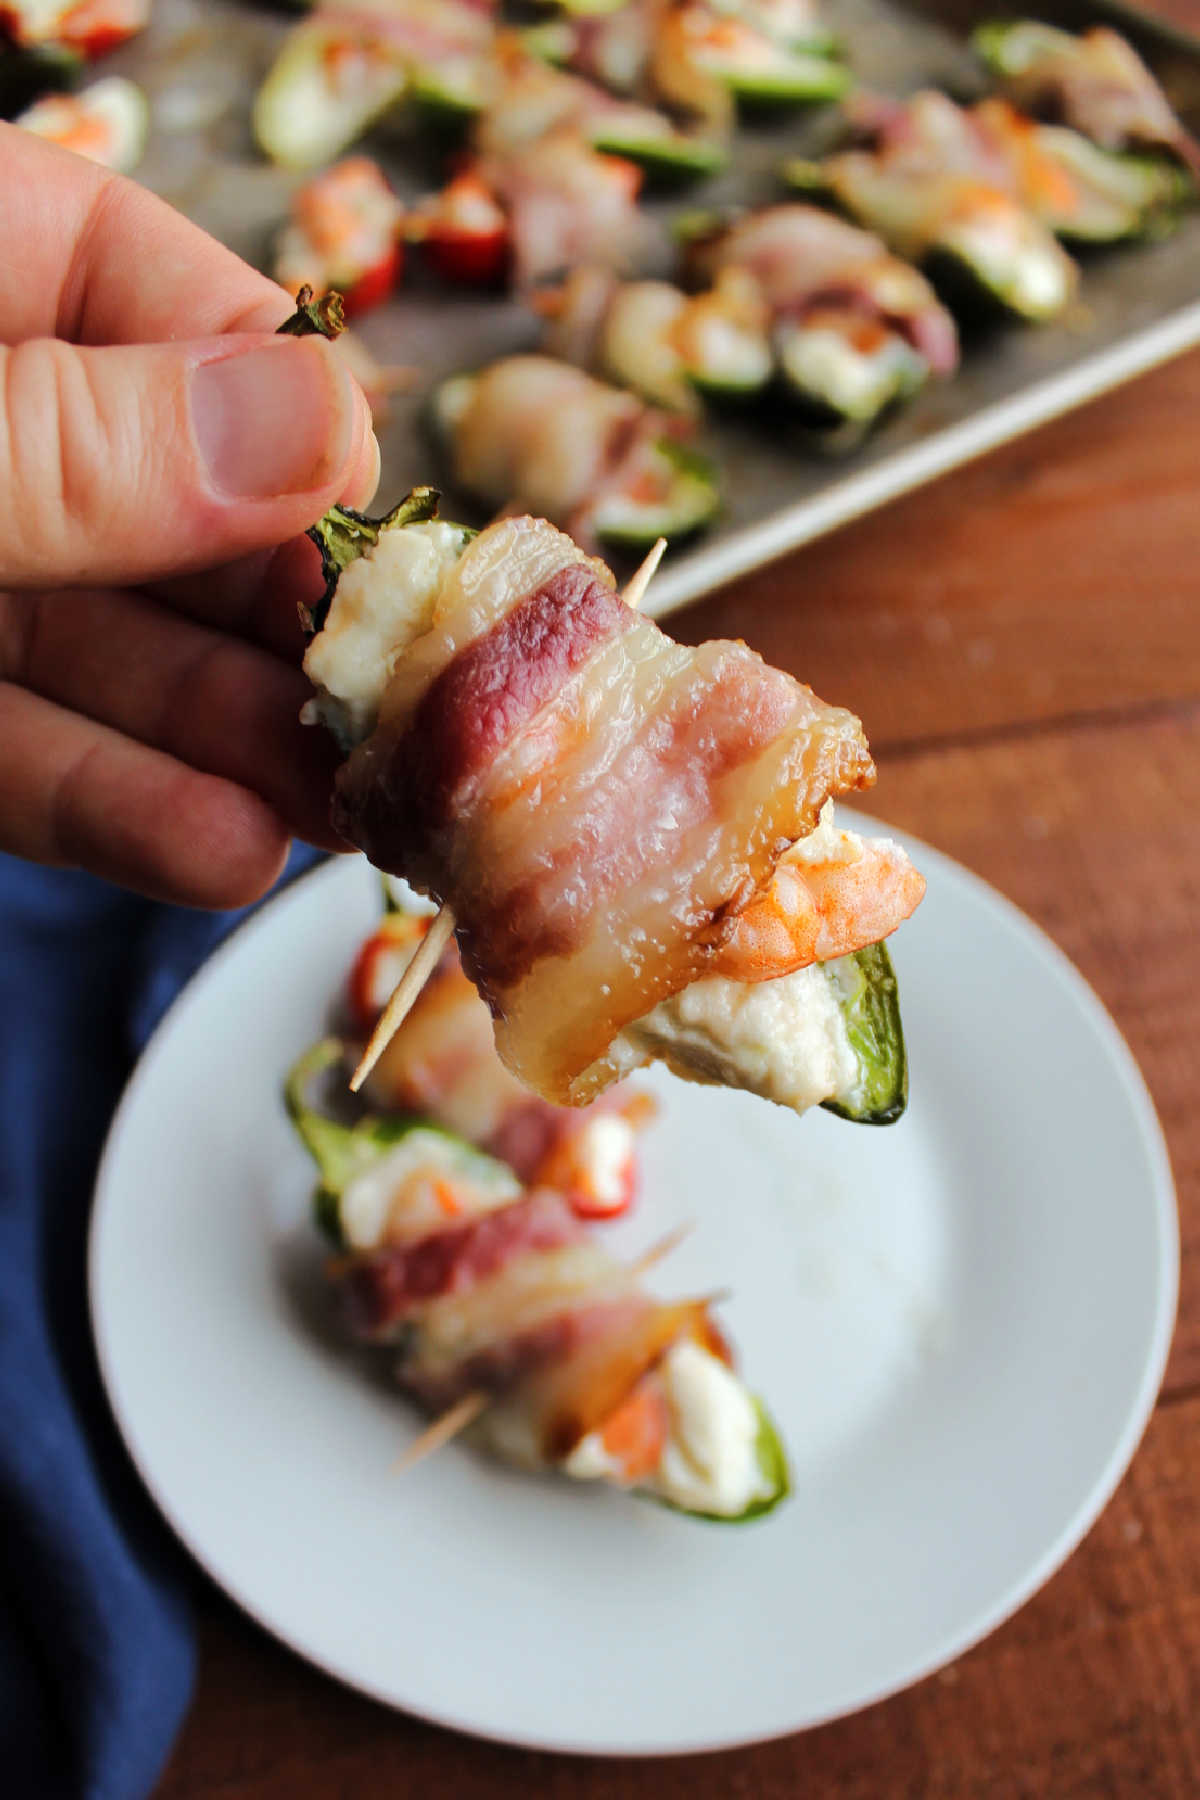 Hand holding jalapeno popper stuffed with garlic cream cheese and a shrimp, wrapped in bacon and cooked.